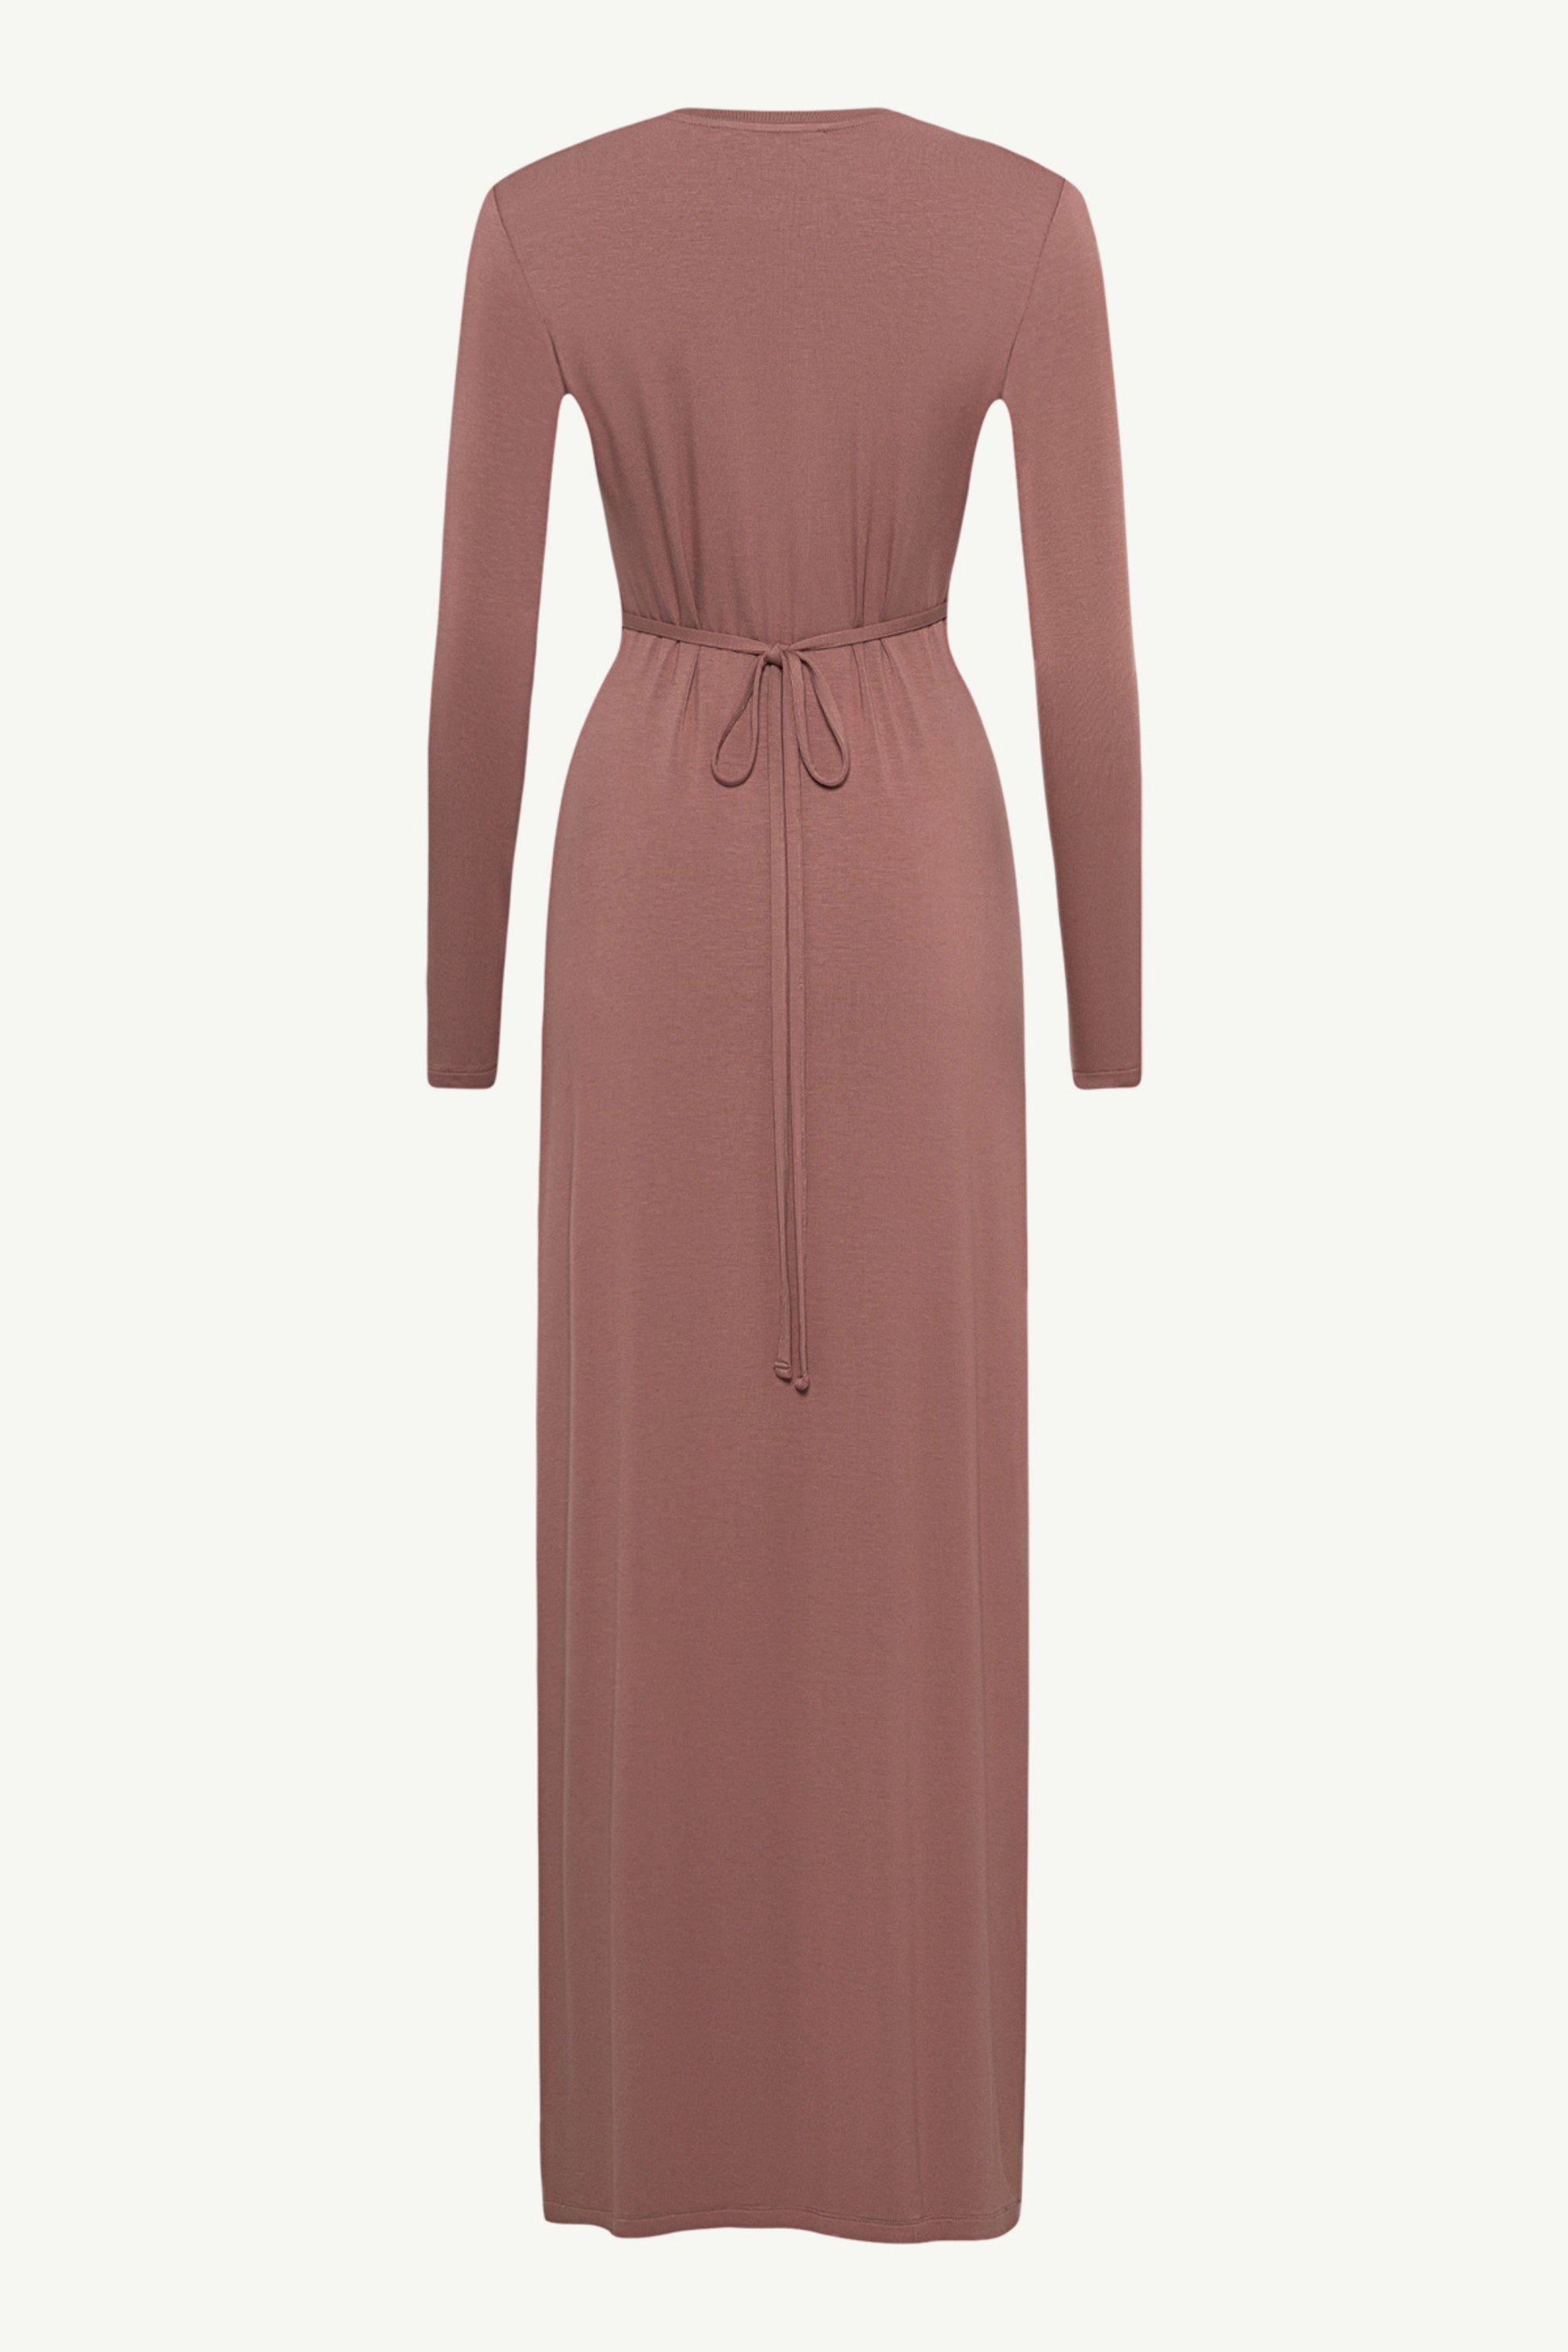 Essential Bamboo Jersey Maxi Dress - Deep Taupe Clothing Veiled 